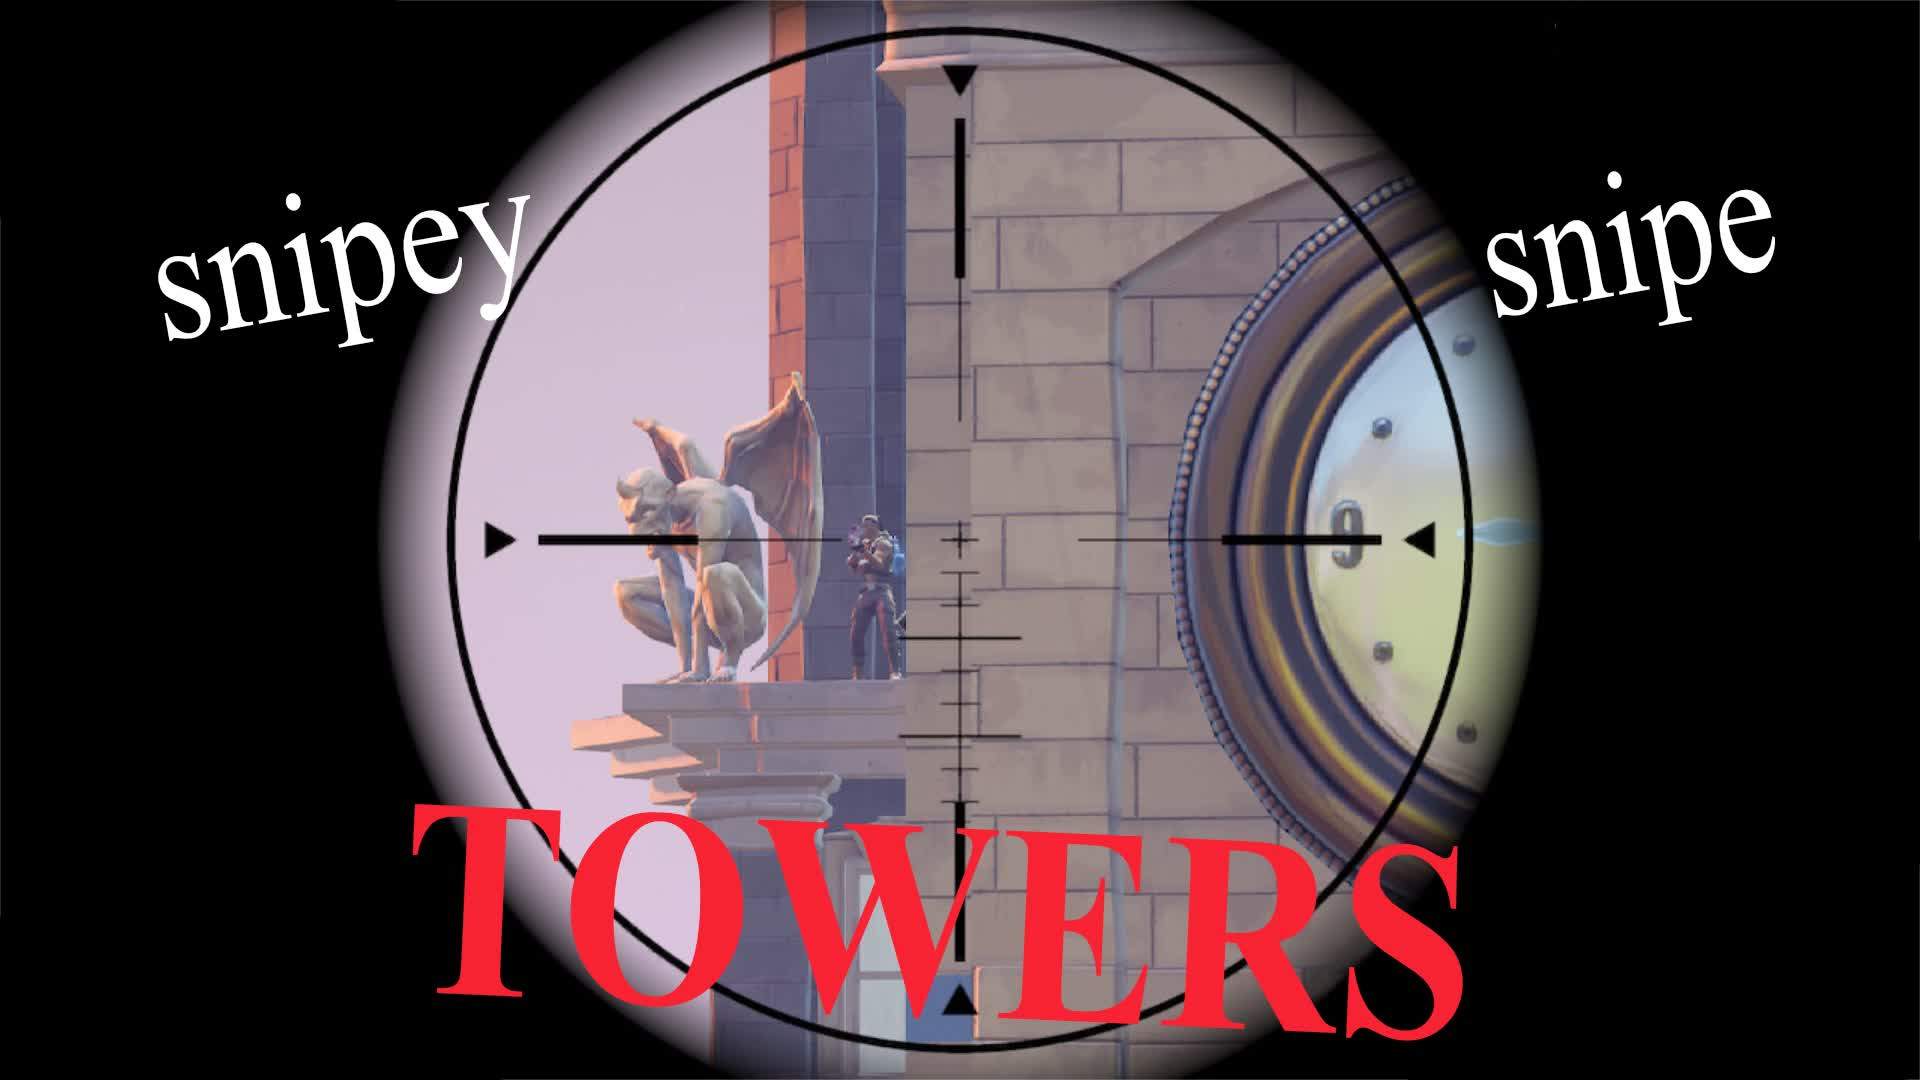 Snipey Snipe Towers!